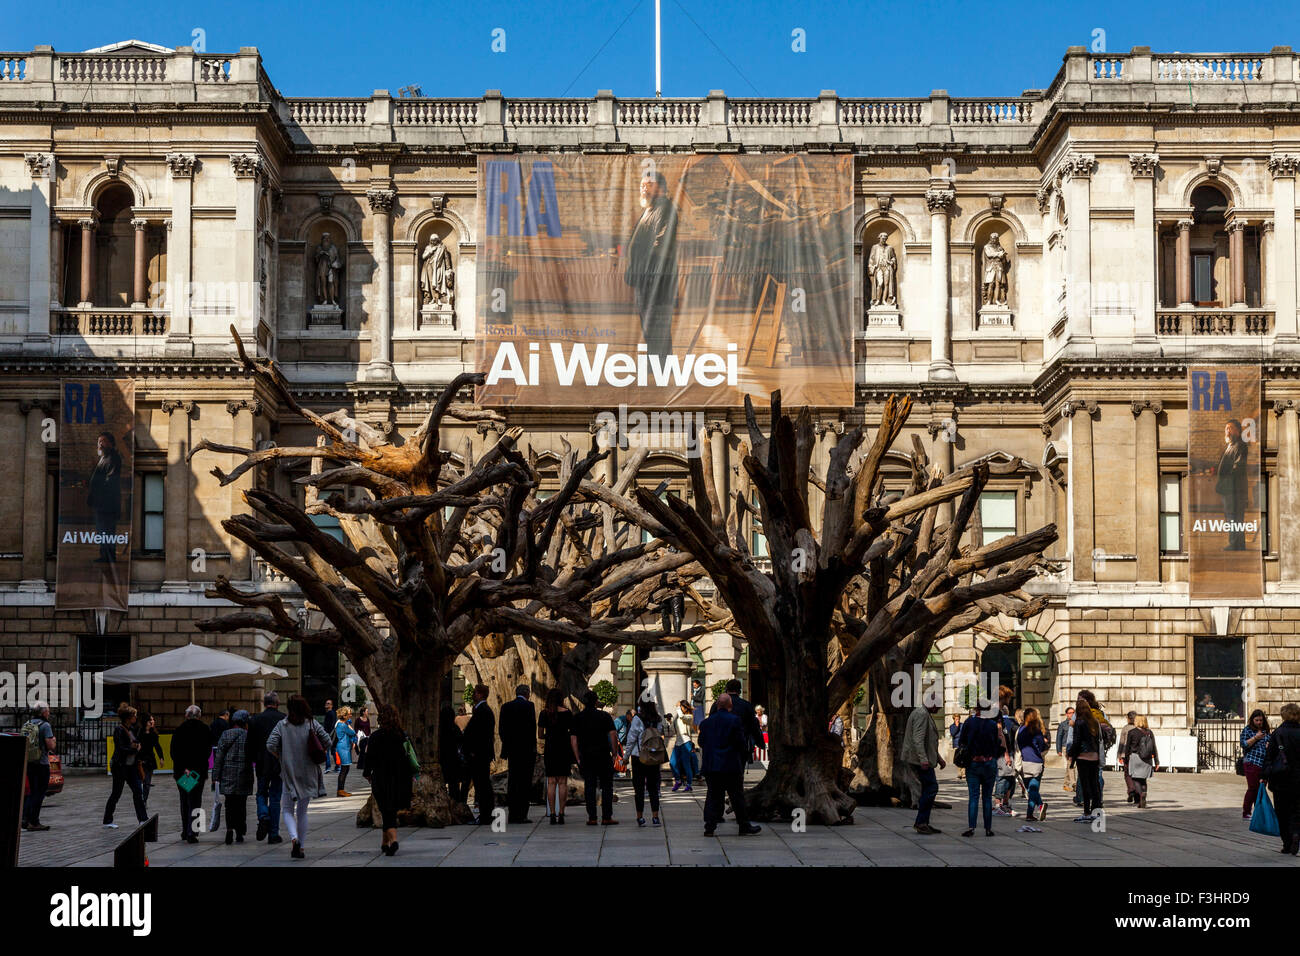 Ai Weiwei's Tree Installation In The Courtyard of The Royal Academy of Art, London, England Stock Photo